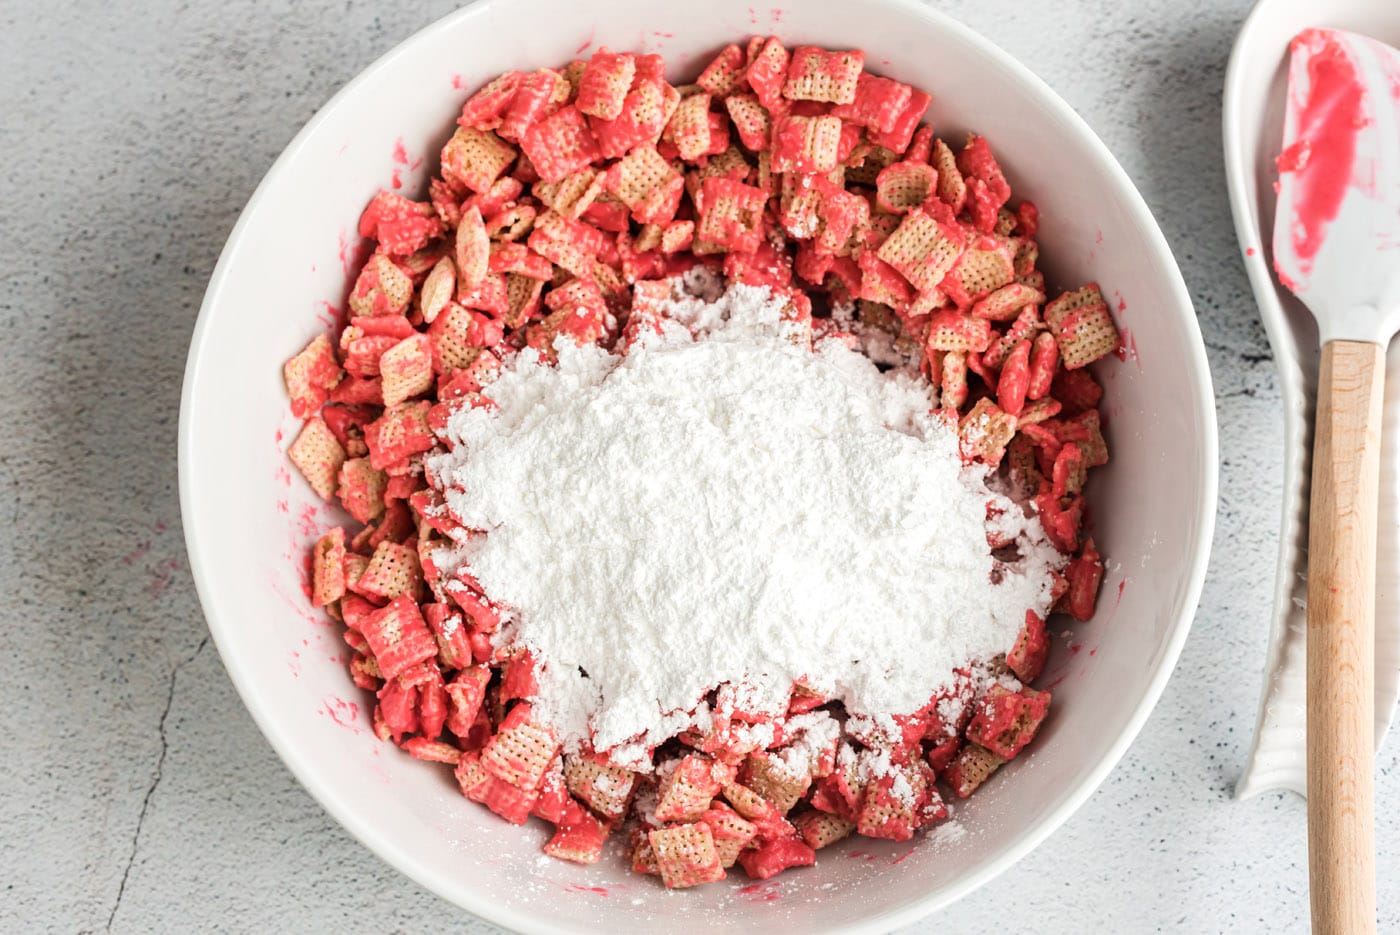 powdered sugar over chocolate coated chex cereal